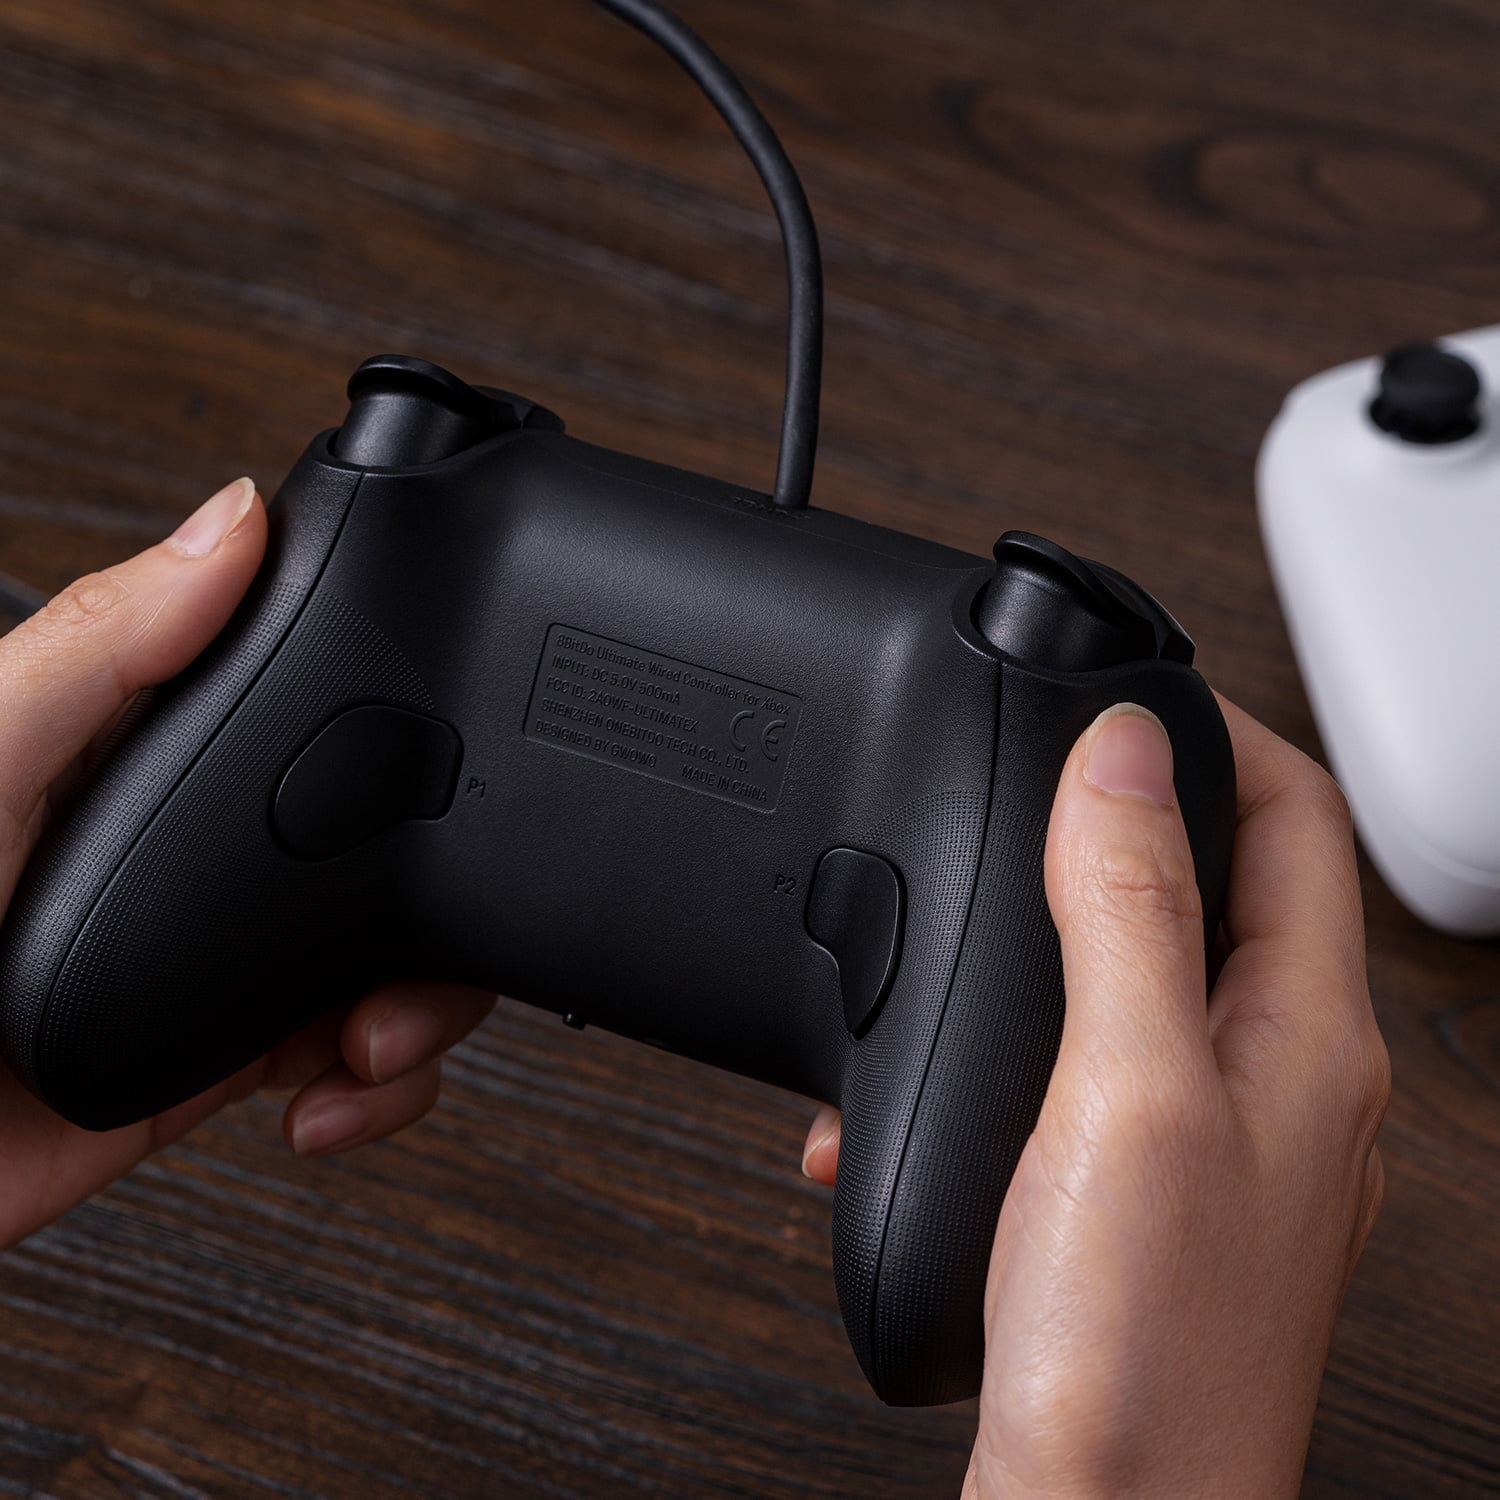 8BitDo Ultimate Wired Controller for Xbox - WhatGeek